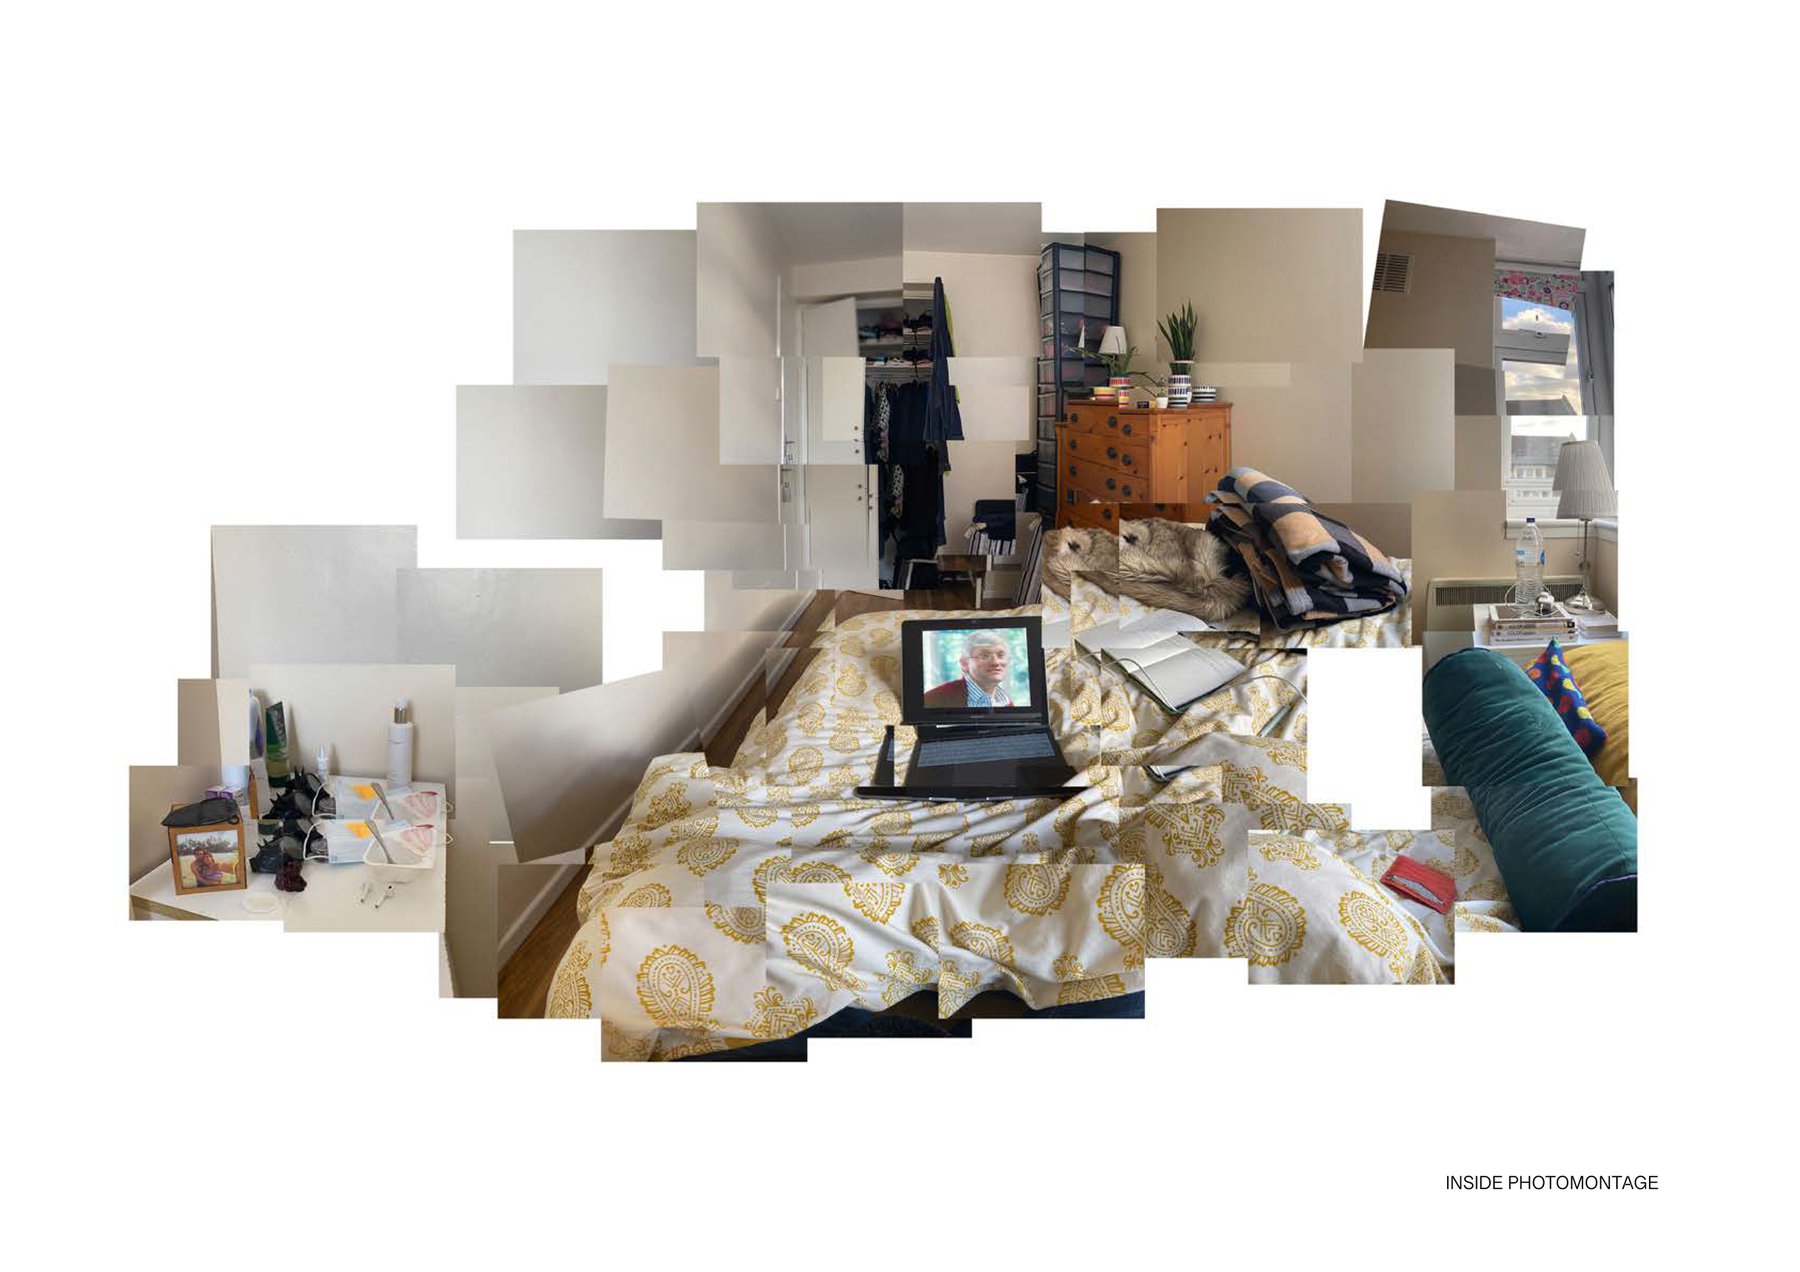 An image made out of multiple small photos taken from different angles and collaged together that show the interior of a student's bedroom